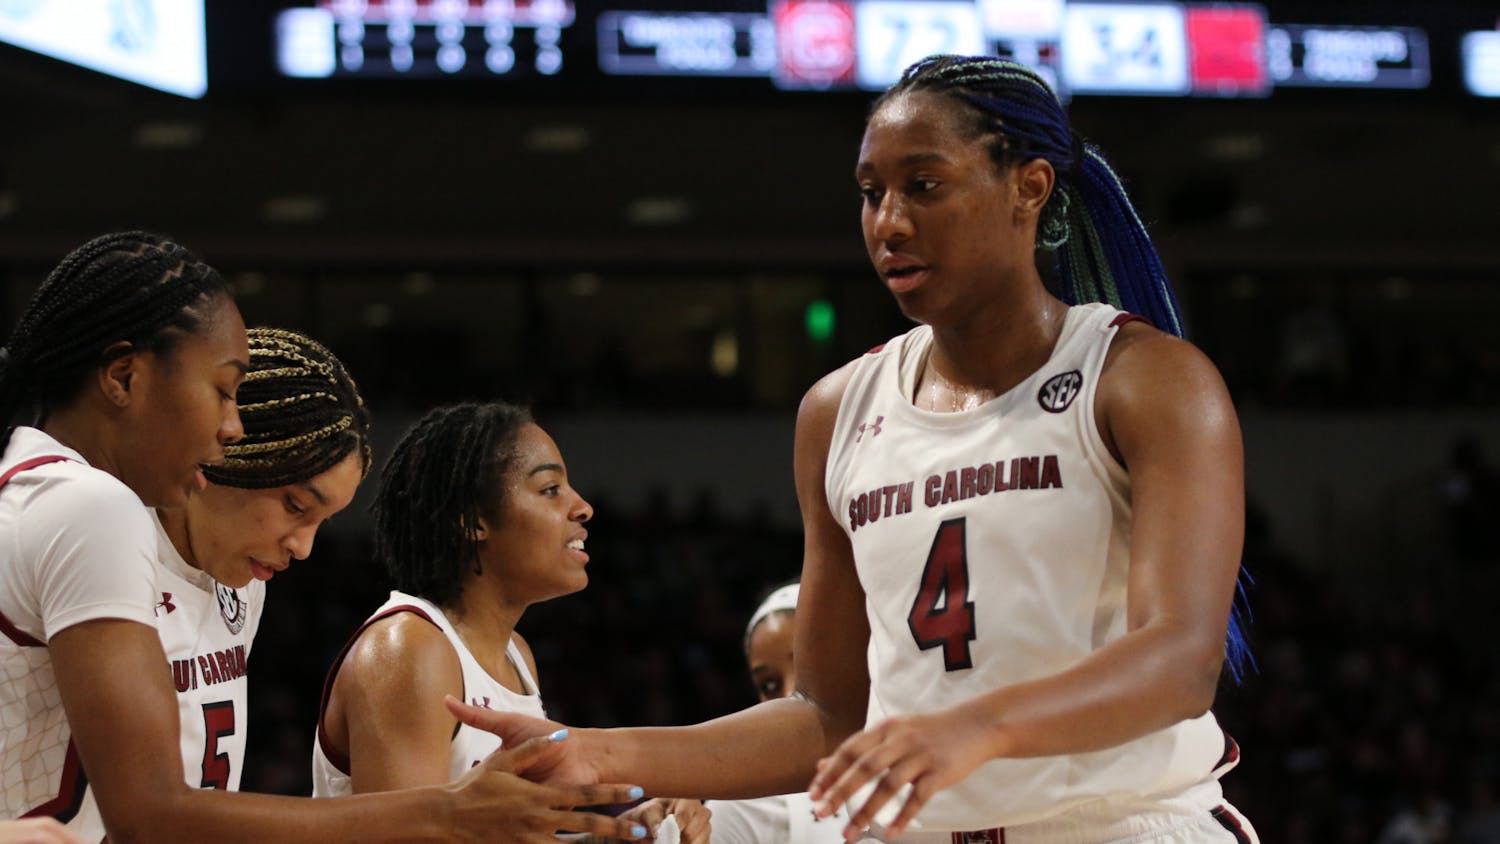 Senior forward Aliyah Boston high-fives her teammates as she makes her way off the court for the night on Jan. 22, 2023. The Gamecocks defeated Arkansas 92-46, and Boston recorded her program-best 73rd career double-double.&nbsp;